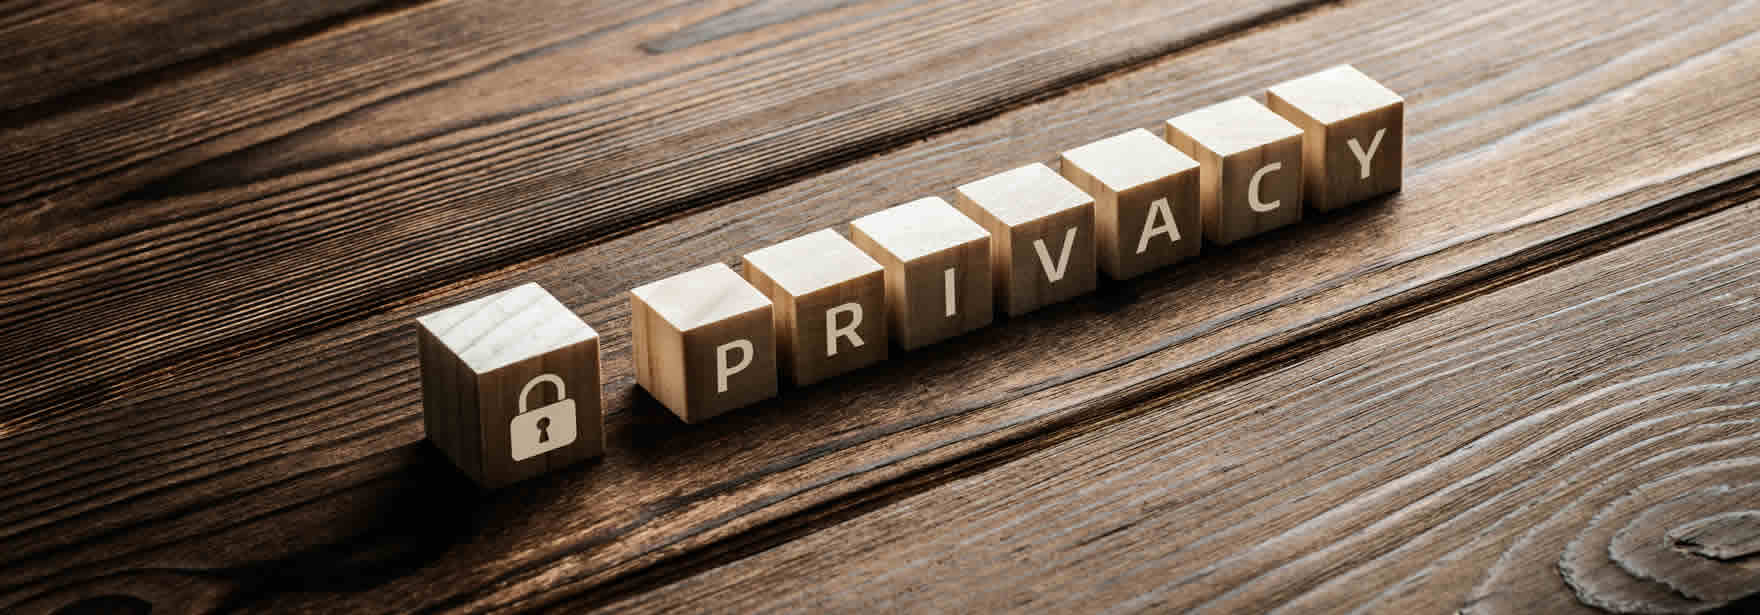 Privacy Policy for Valley Mortgage, Inc.